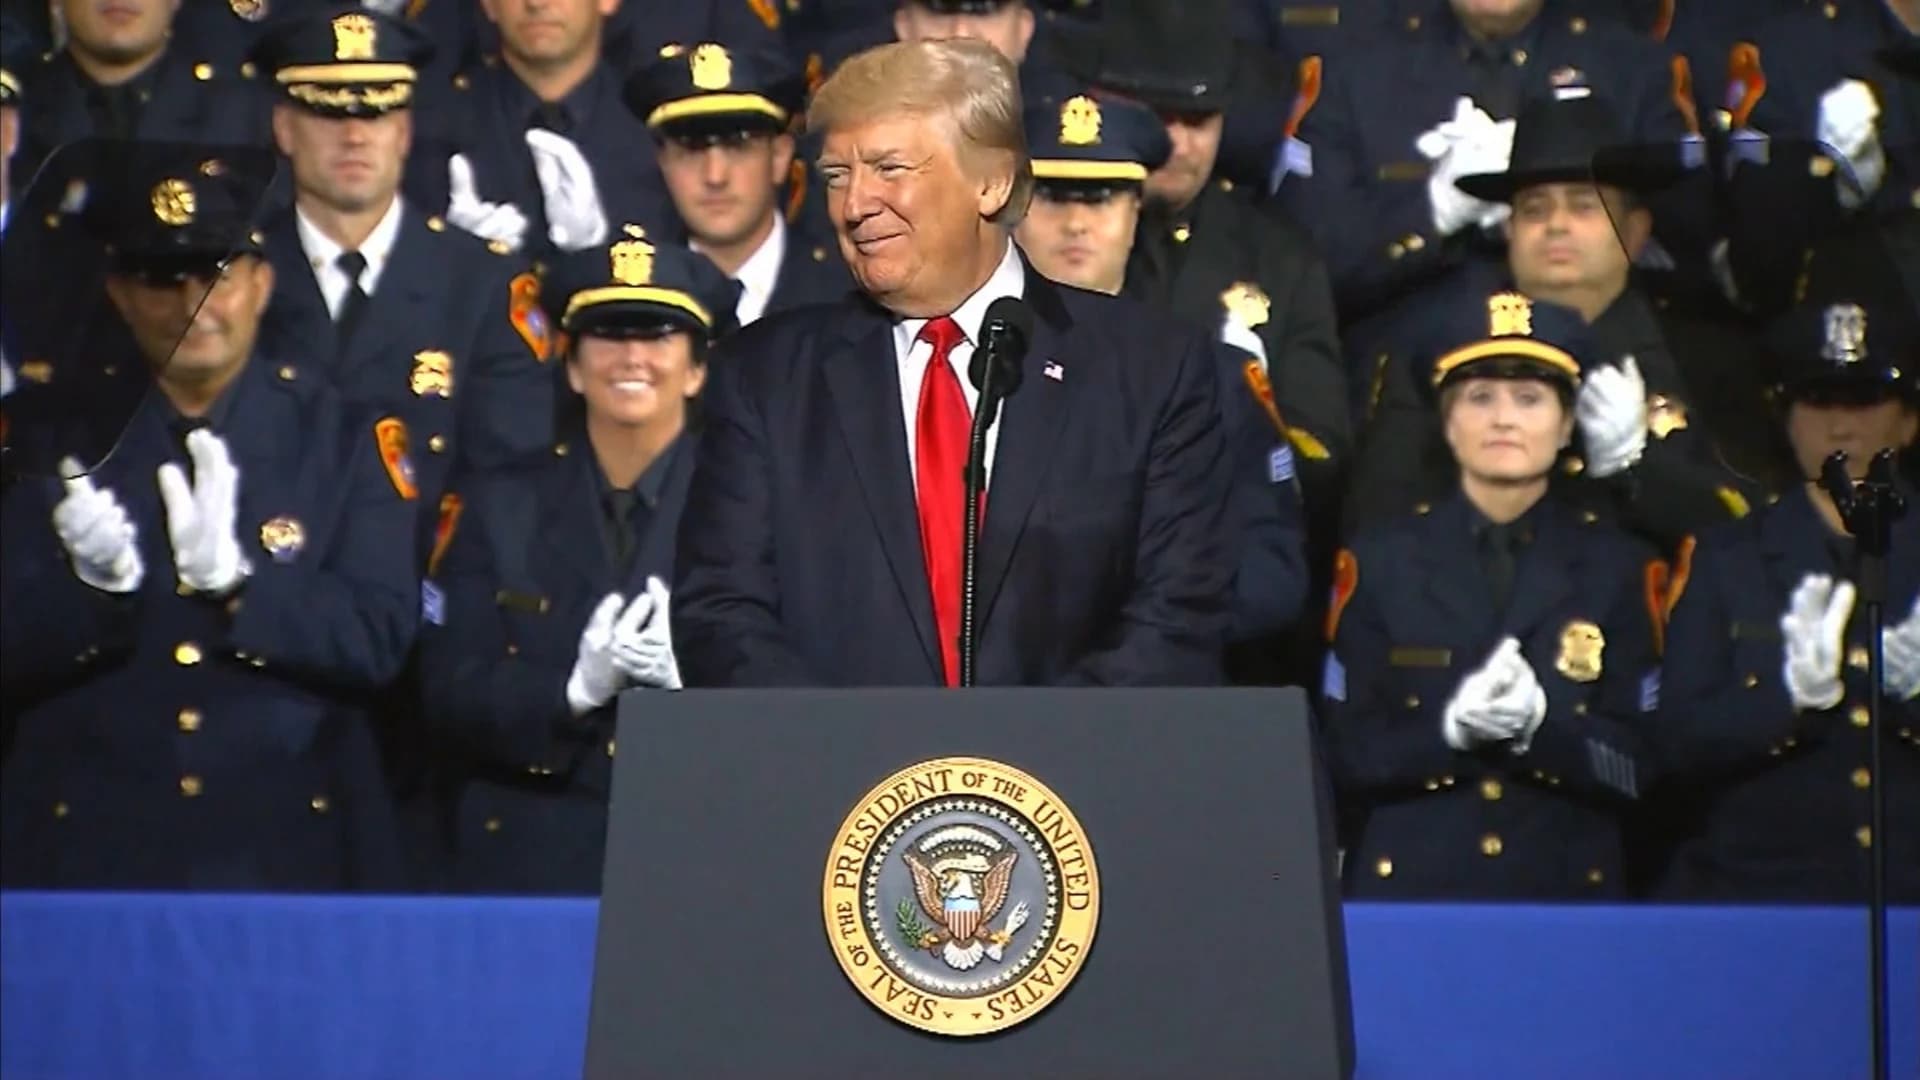 Black police concerned by Trump quips on handling suspects